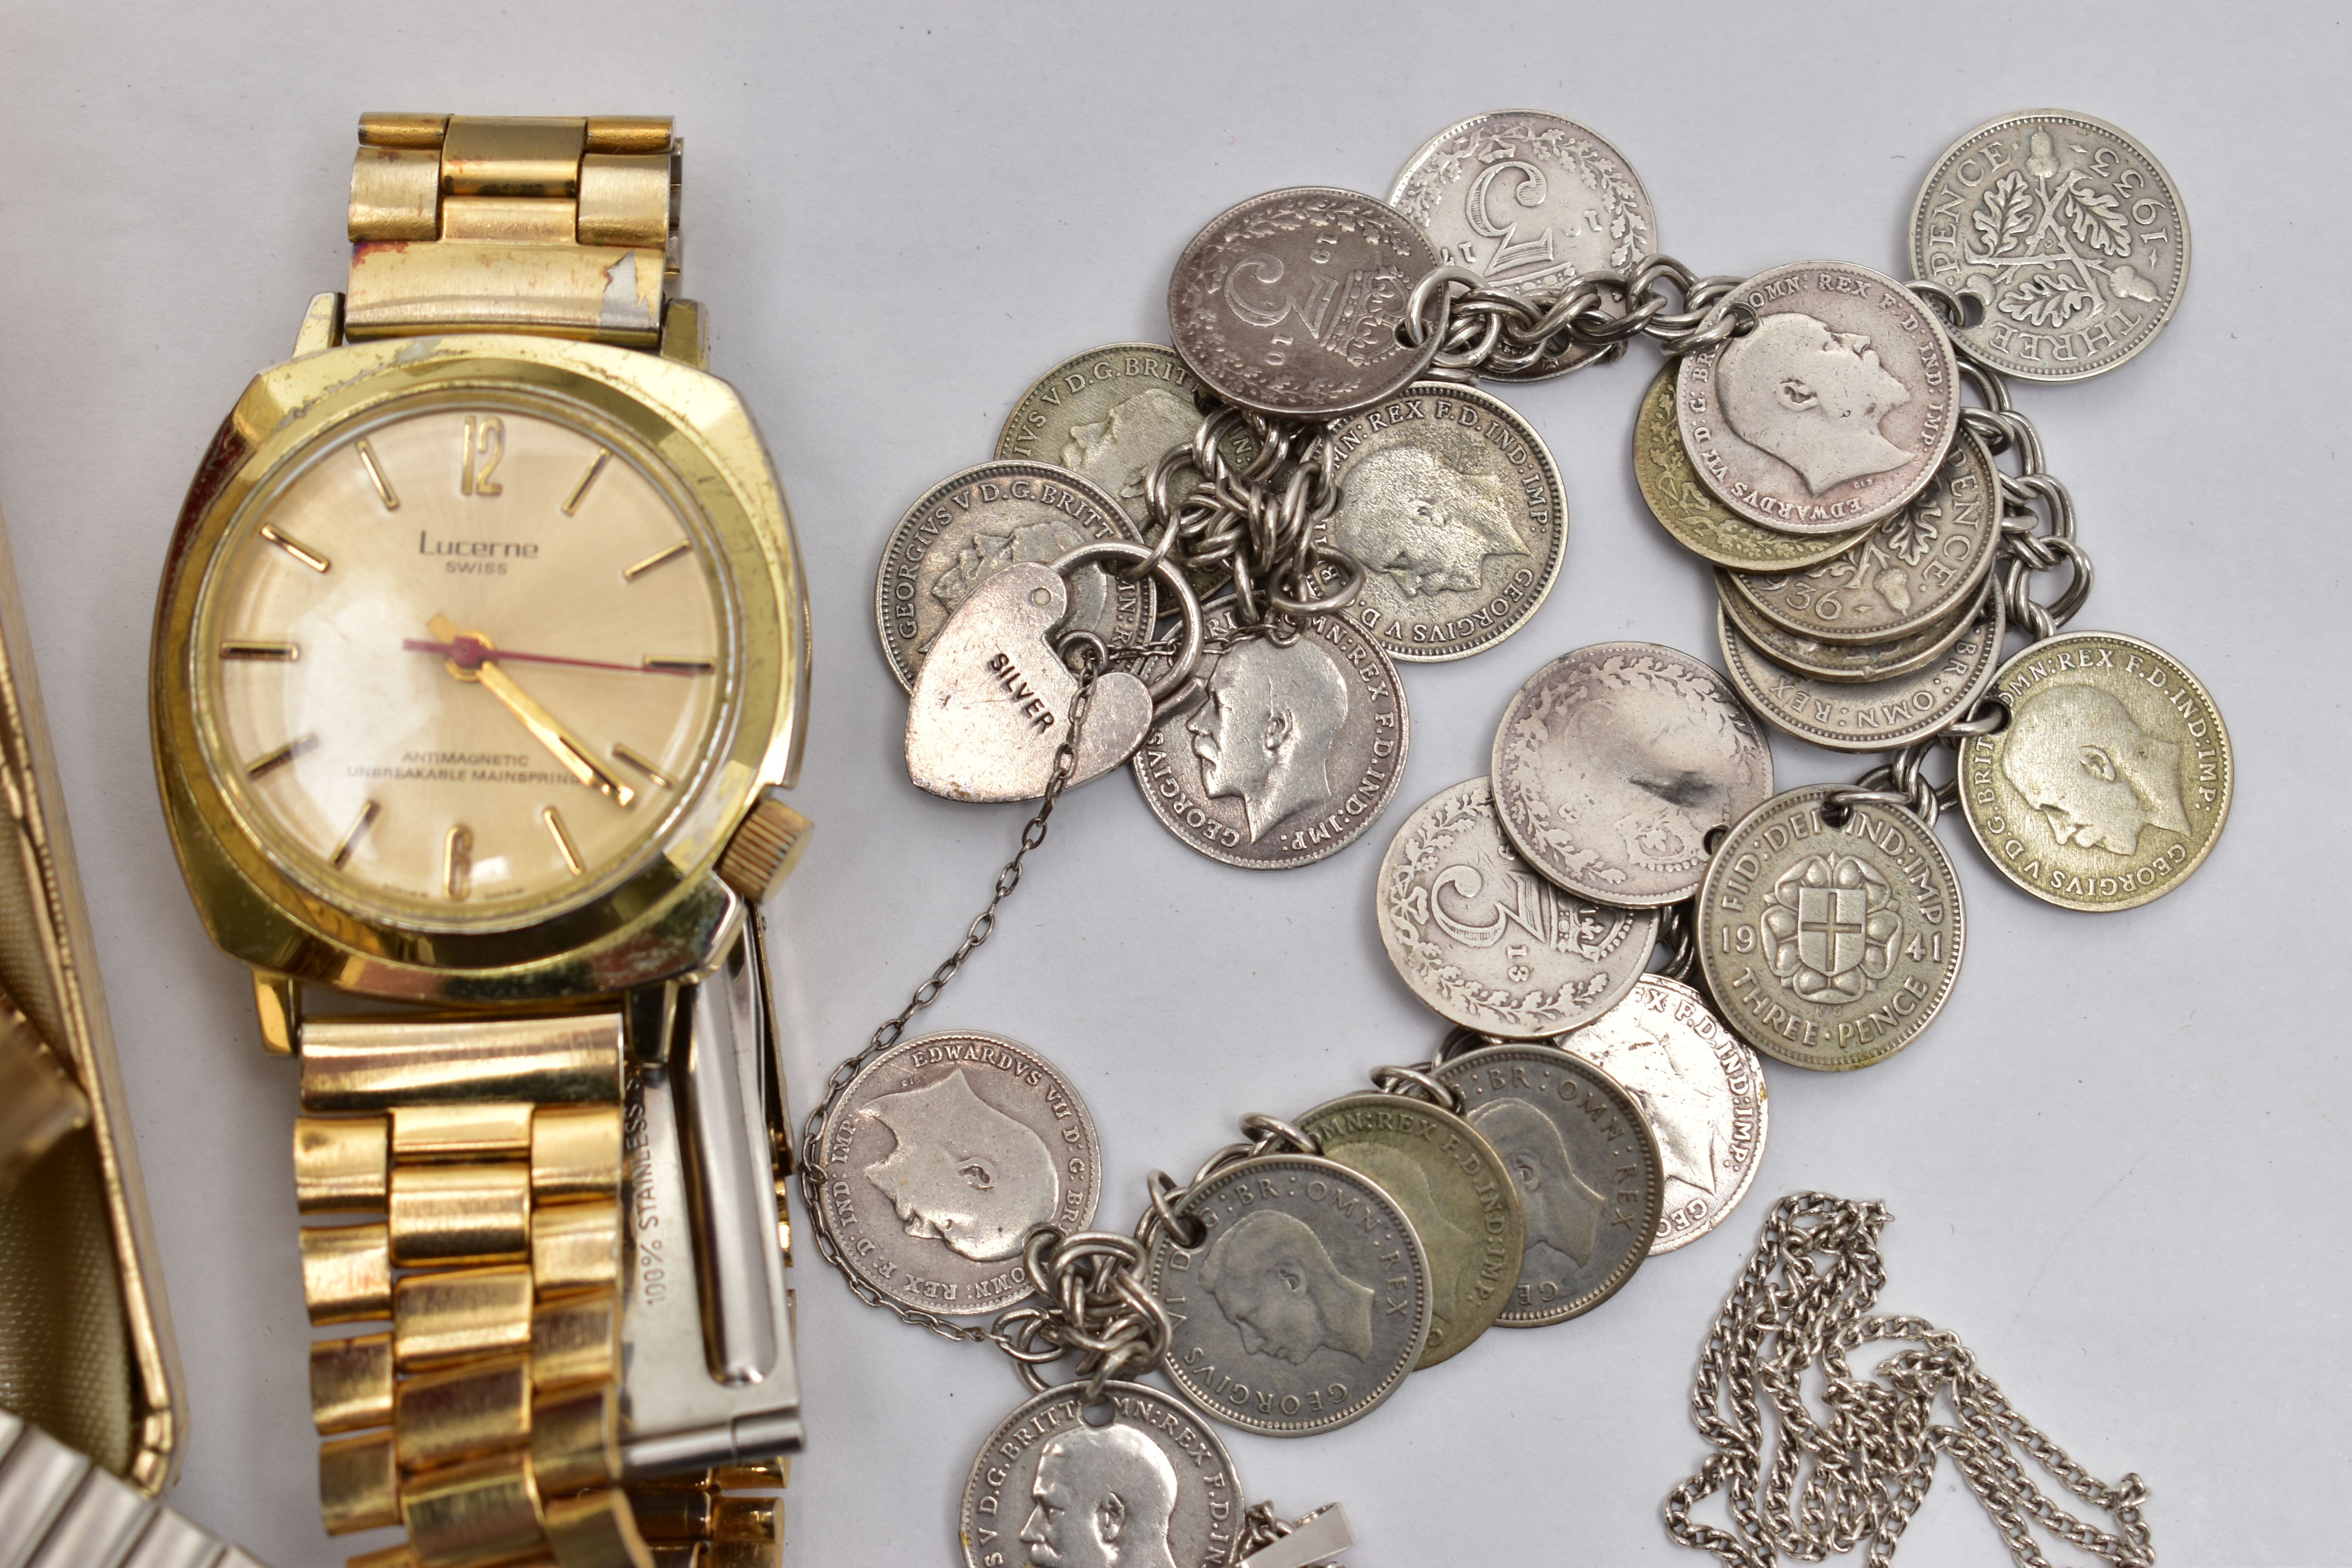 A SELECTION OF STAINLESS STEEL WATCHES, JEWELLERY AND A CHARM BRACELET, the watches with names to - Image 2 of 4